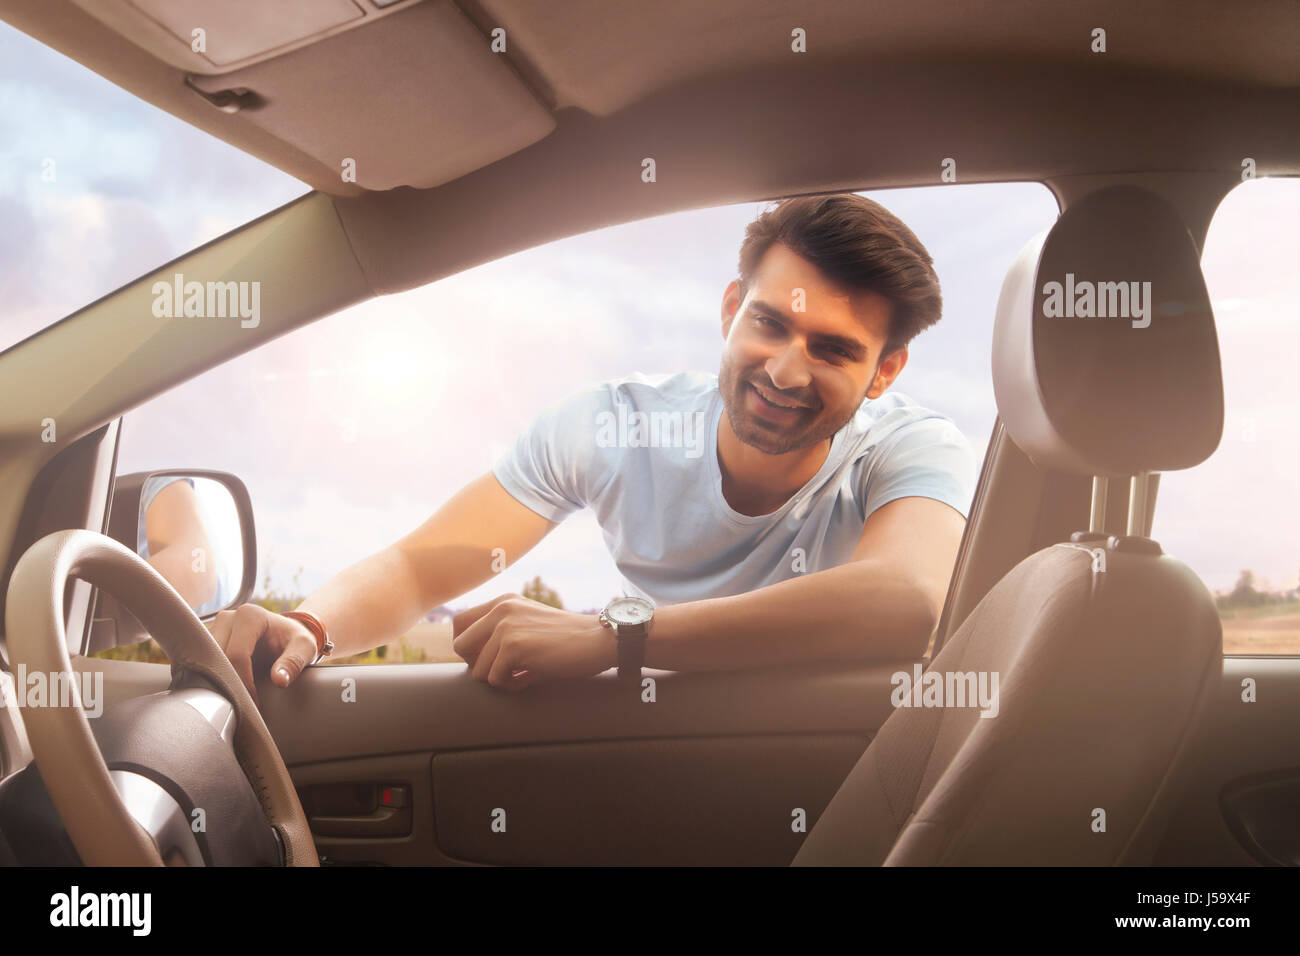 Smiling young man leaning on car window Banque D'Images